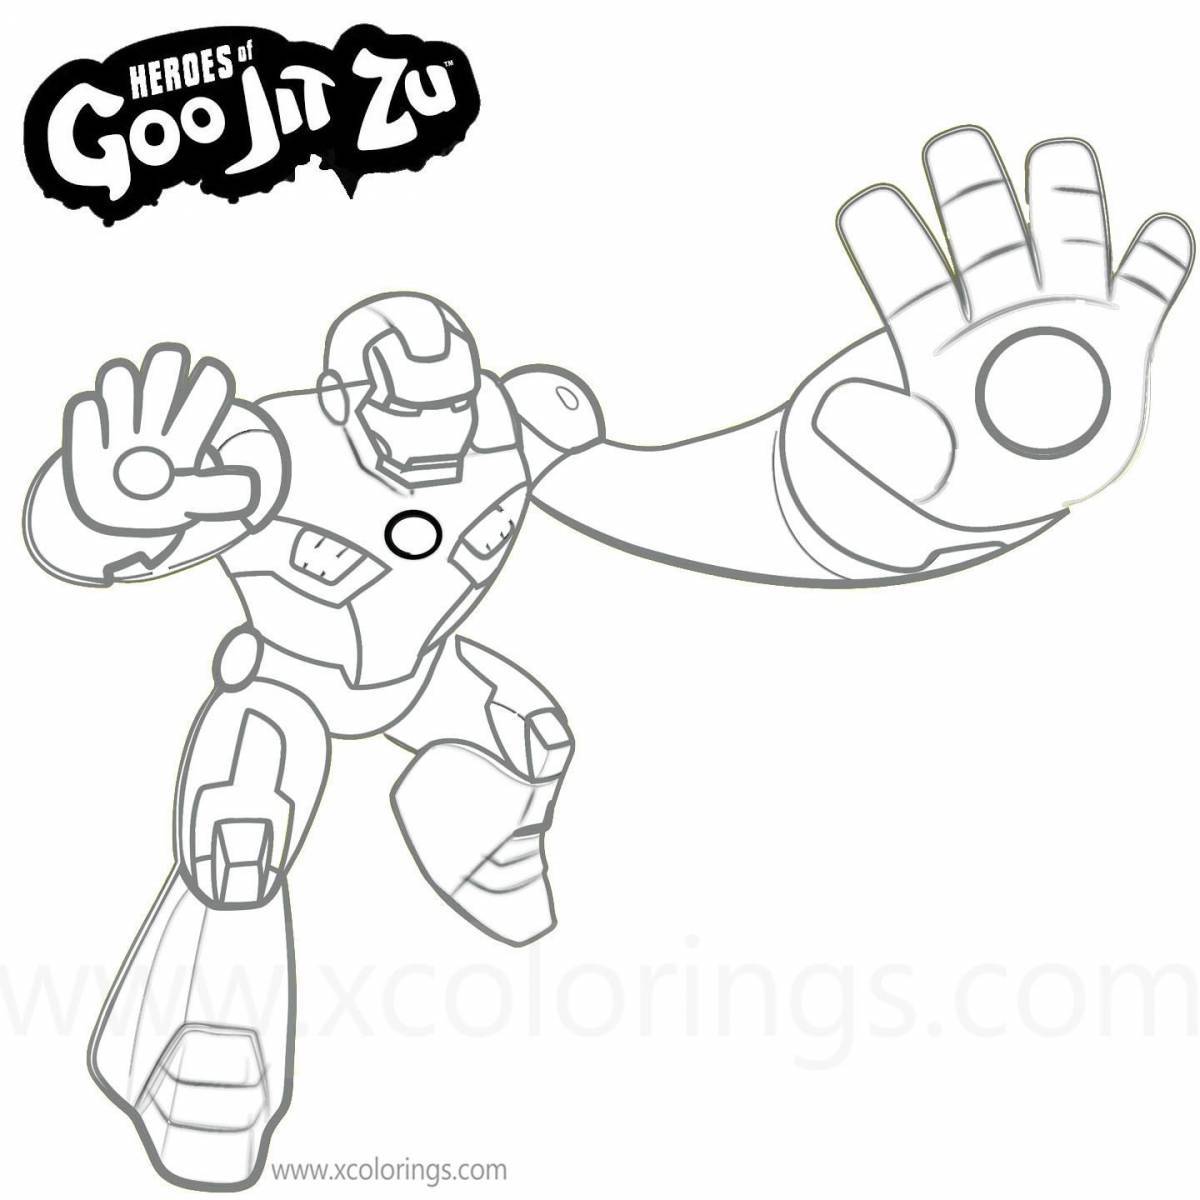 Exciting gujitzu heroes coloring pages